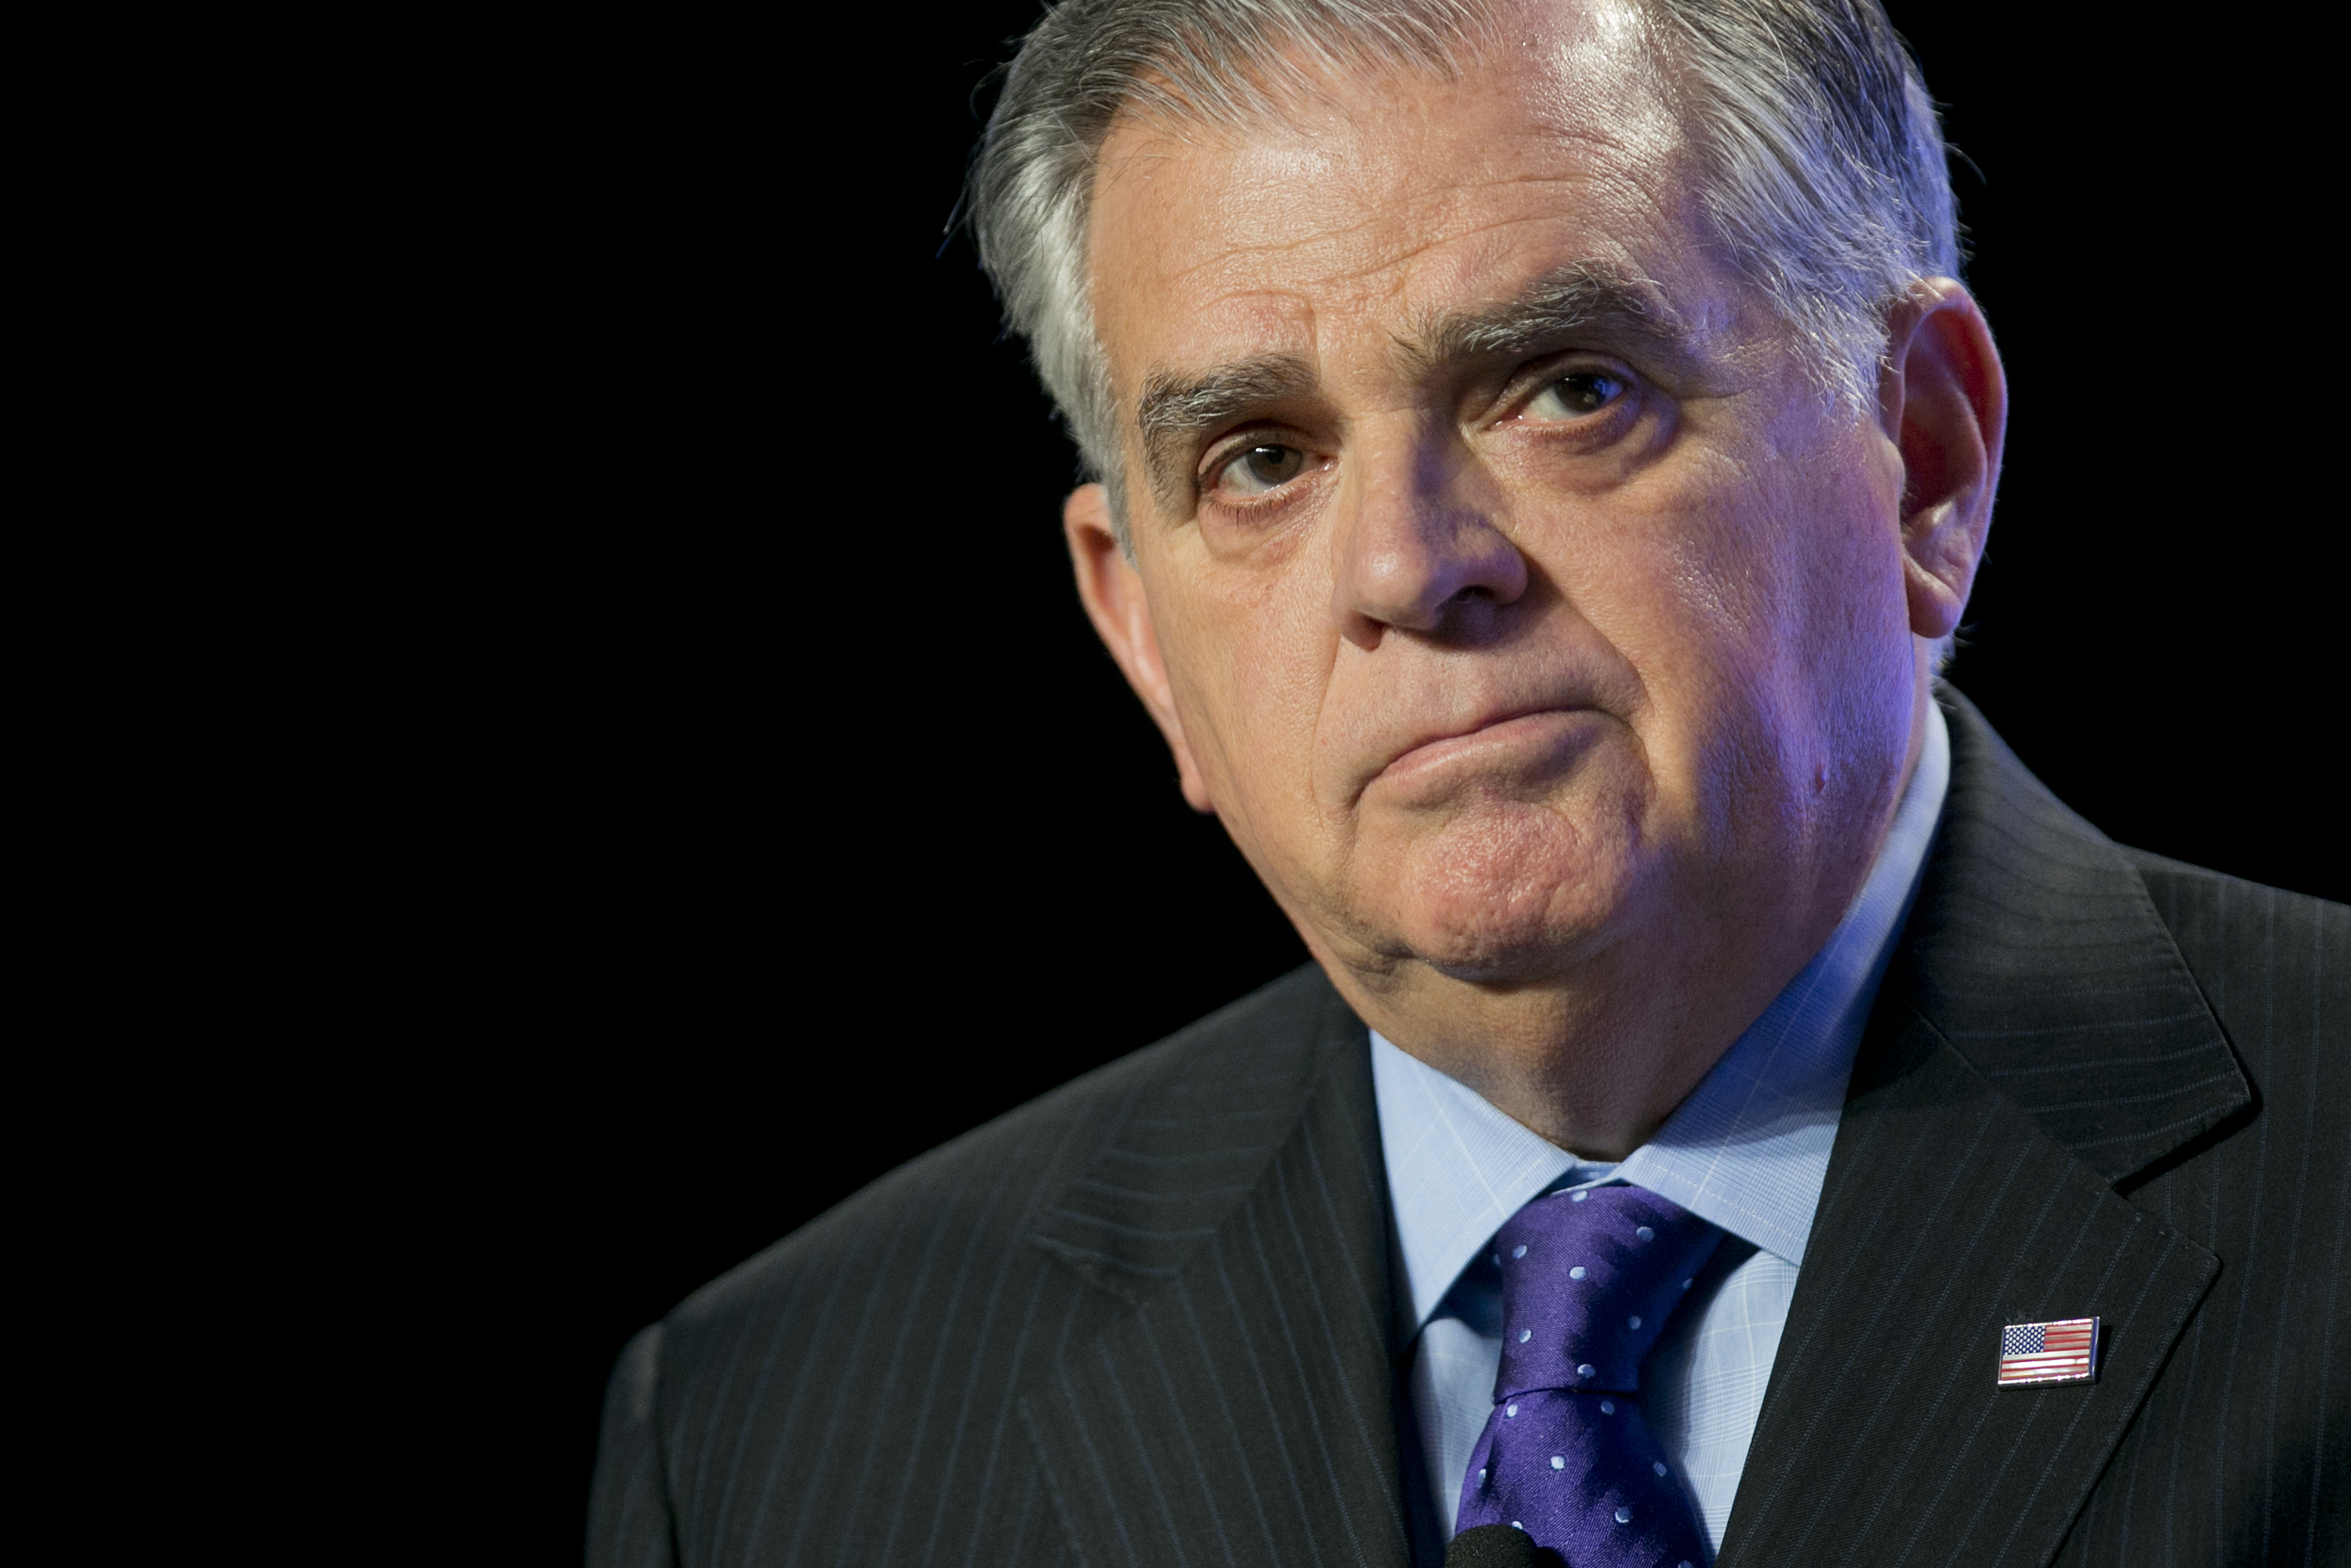 Ray LaHood pauses while speaking during the U.S. Export-Import Bank annual conference in Washington, D.C., U.S., on Friday, April 5, 2013. (Bloomberg—Bloomberg via Getty Images)